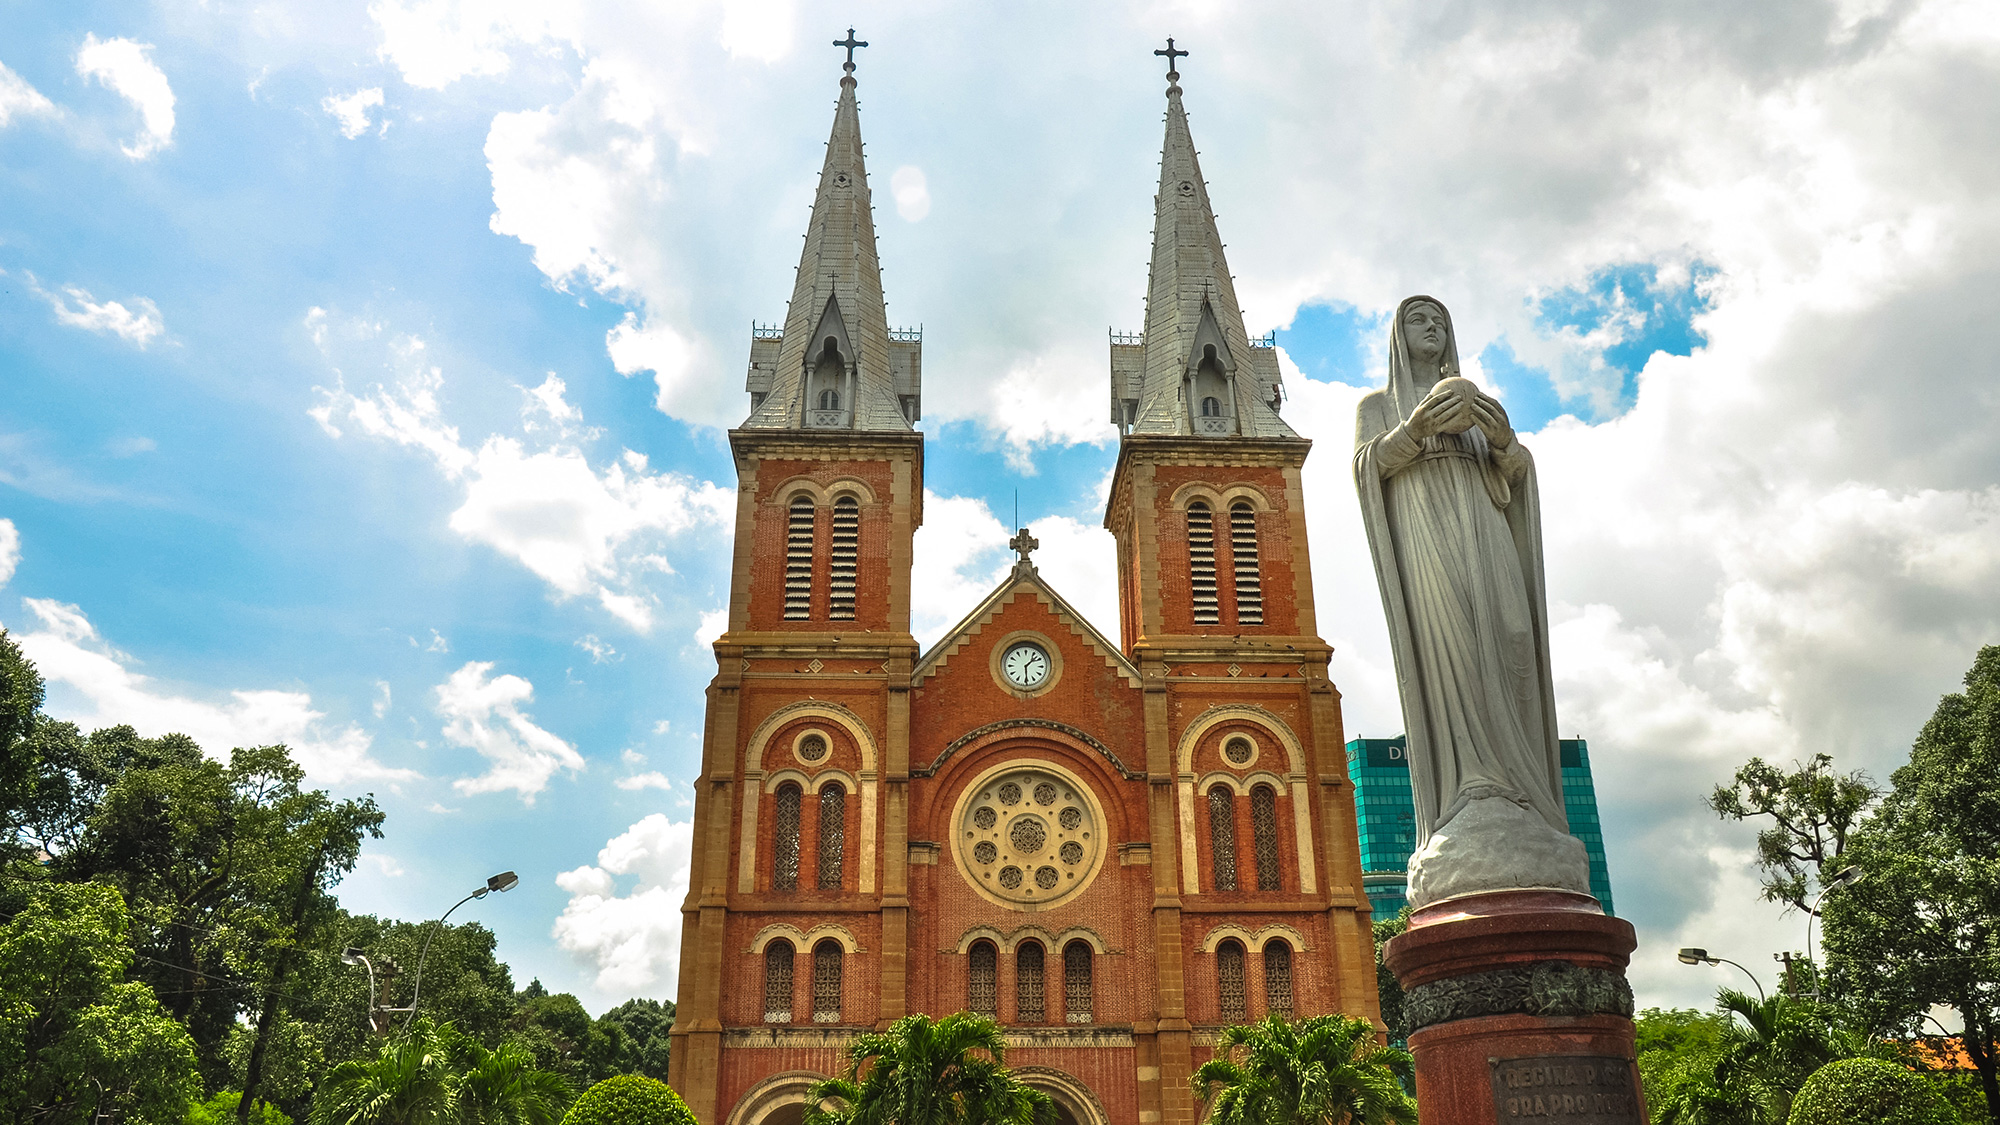 Saigon Notre-Dame Cathedral in Ho Chi Minh city